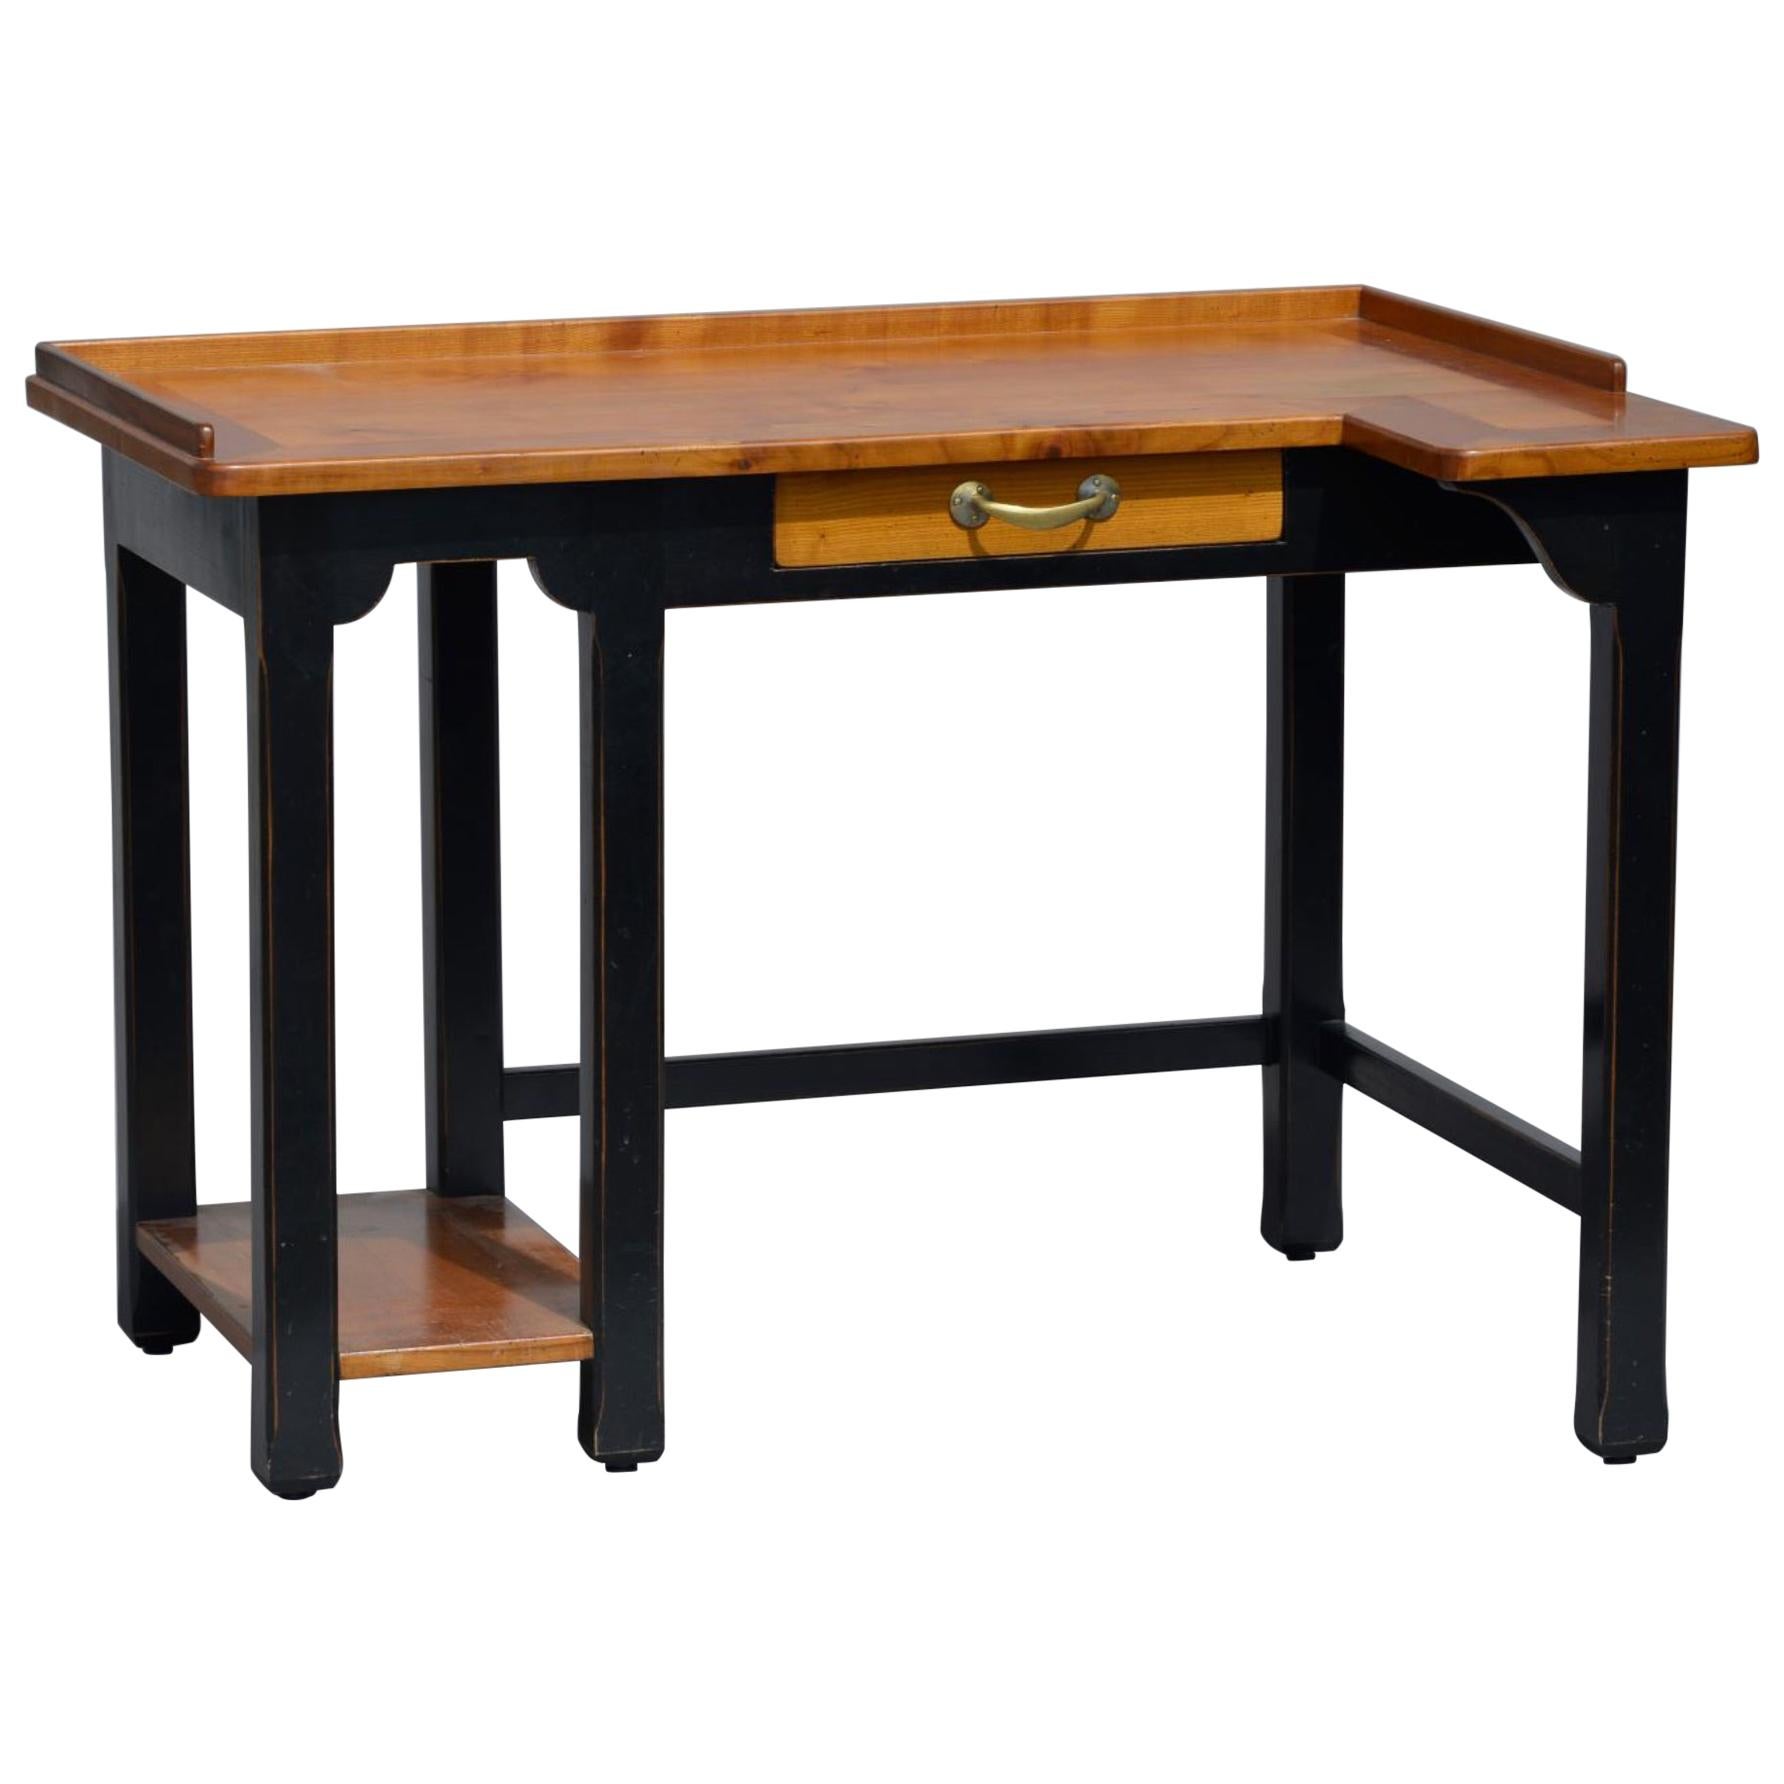 20th Century French Asymmetrical Wooden Writing Table or Desk